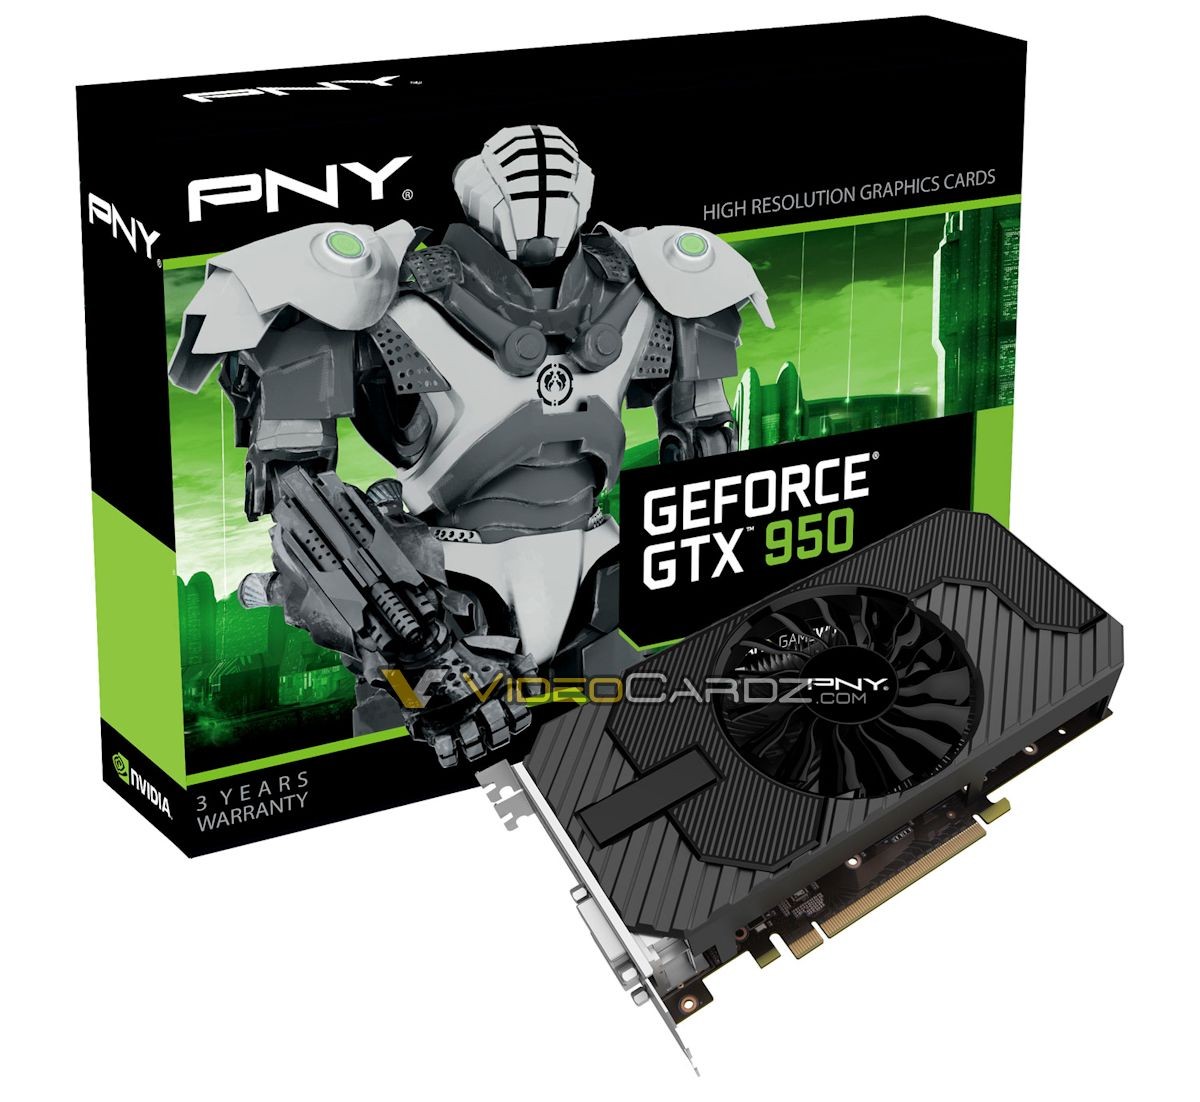 Media asset (photo, screenshot, or image in full size) related to contents posted at 3dfxzone.it | Image Name: news22960-PNY-GeForce-GTX-950_1.jpg